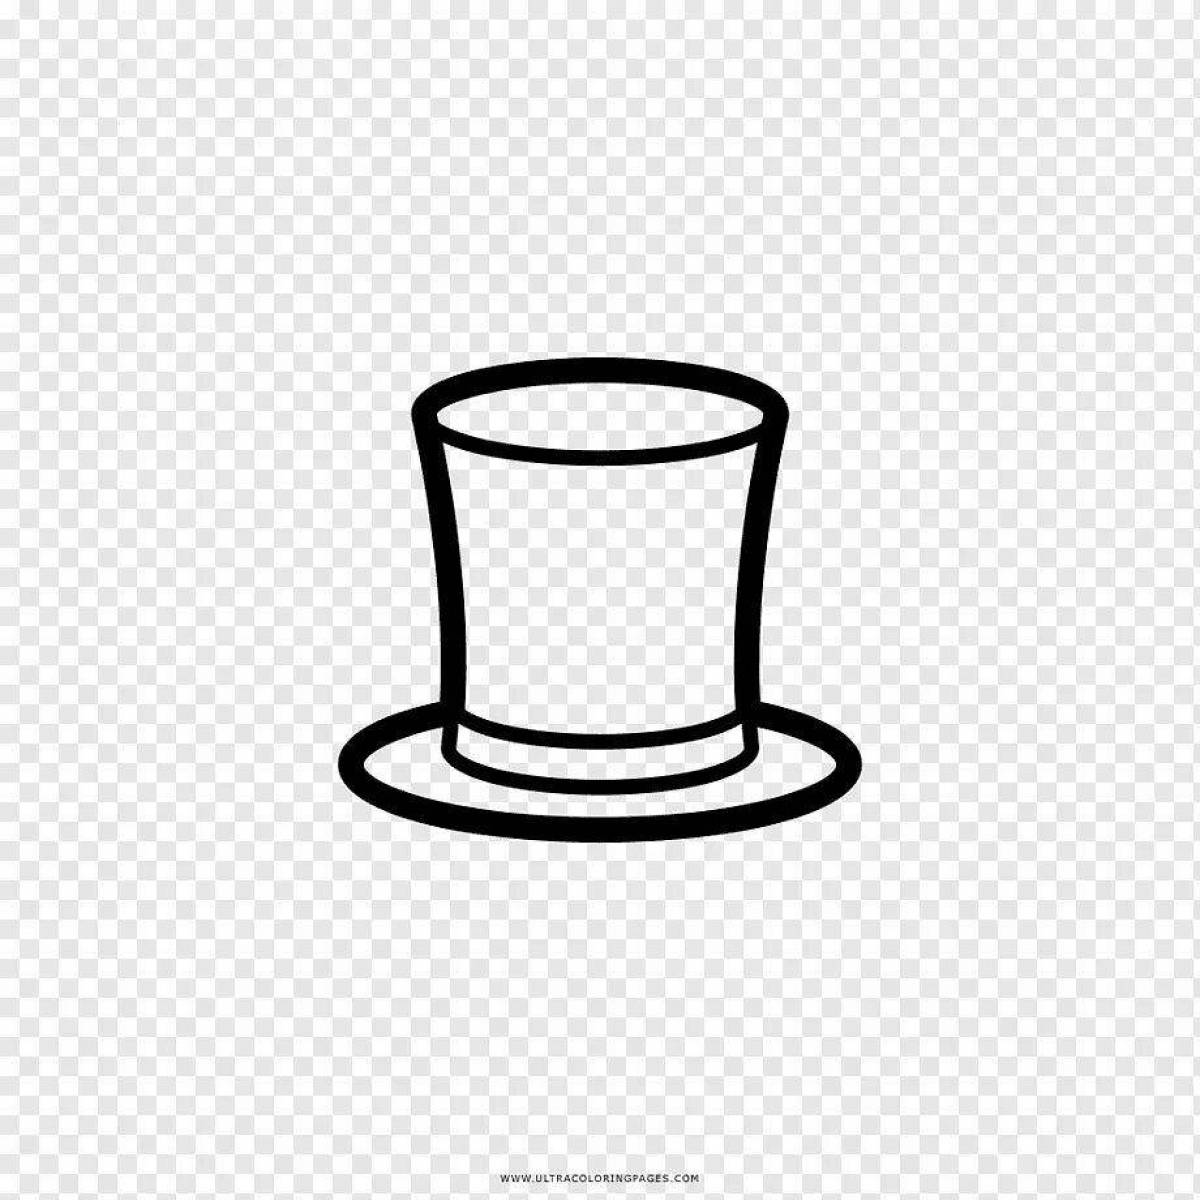 Coloring funny top hat